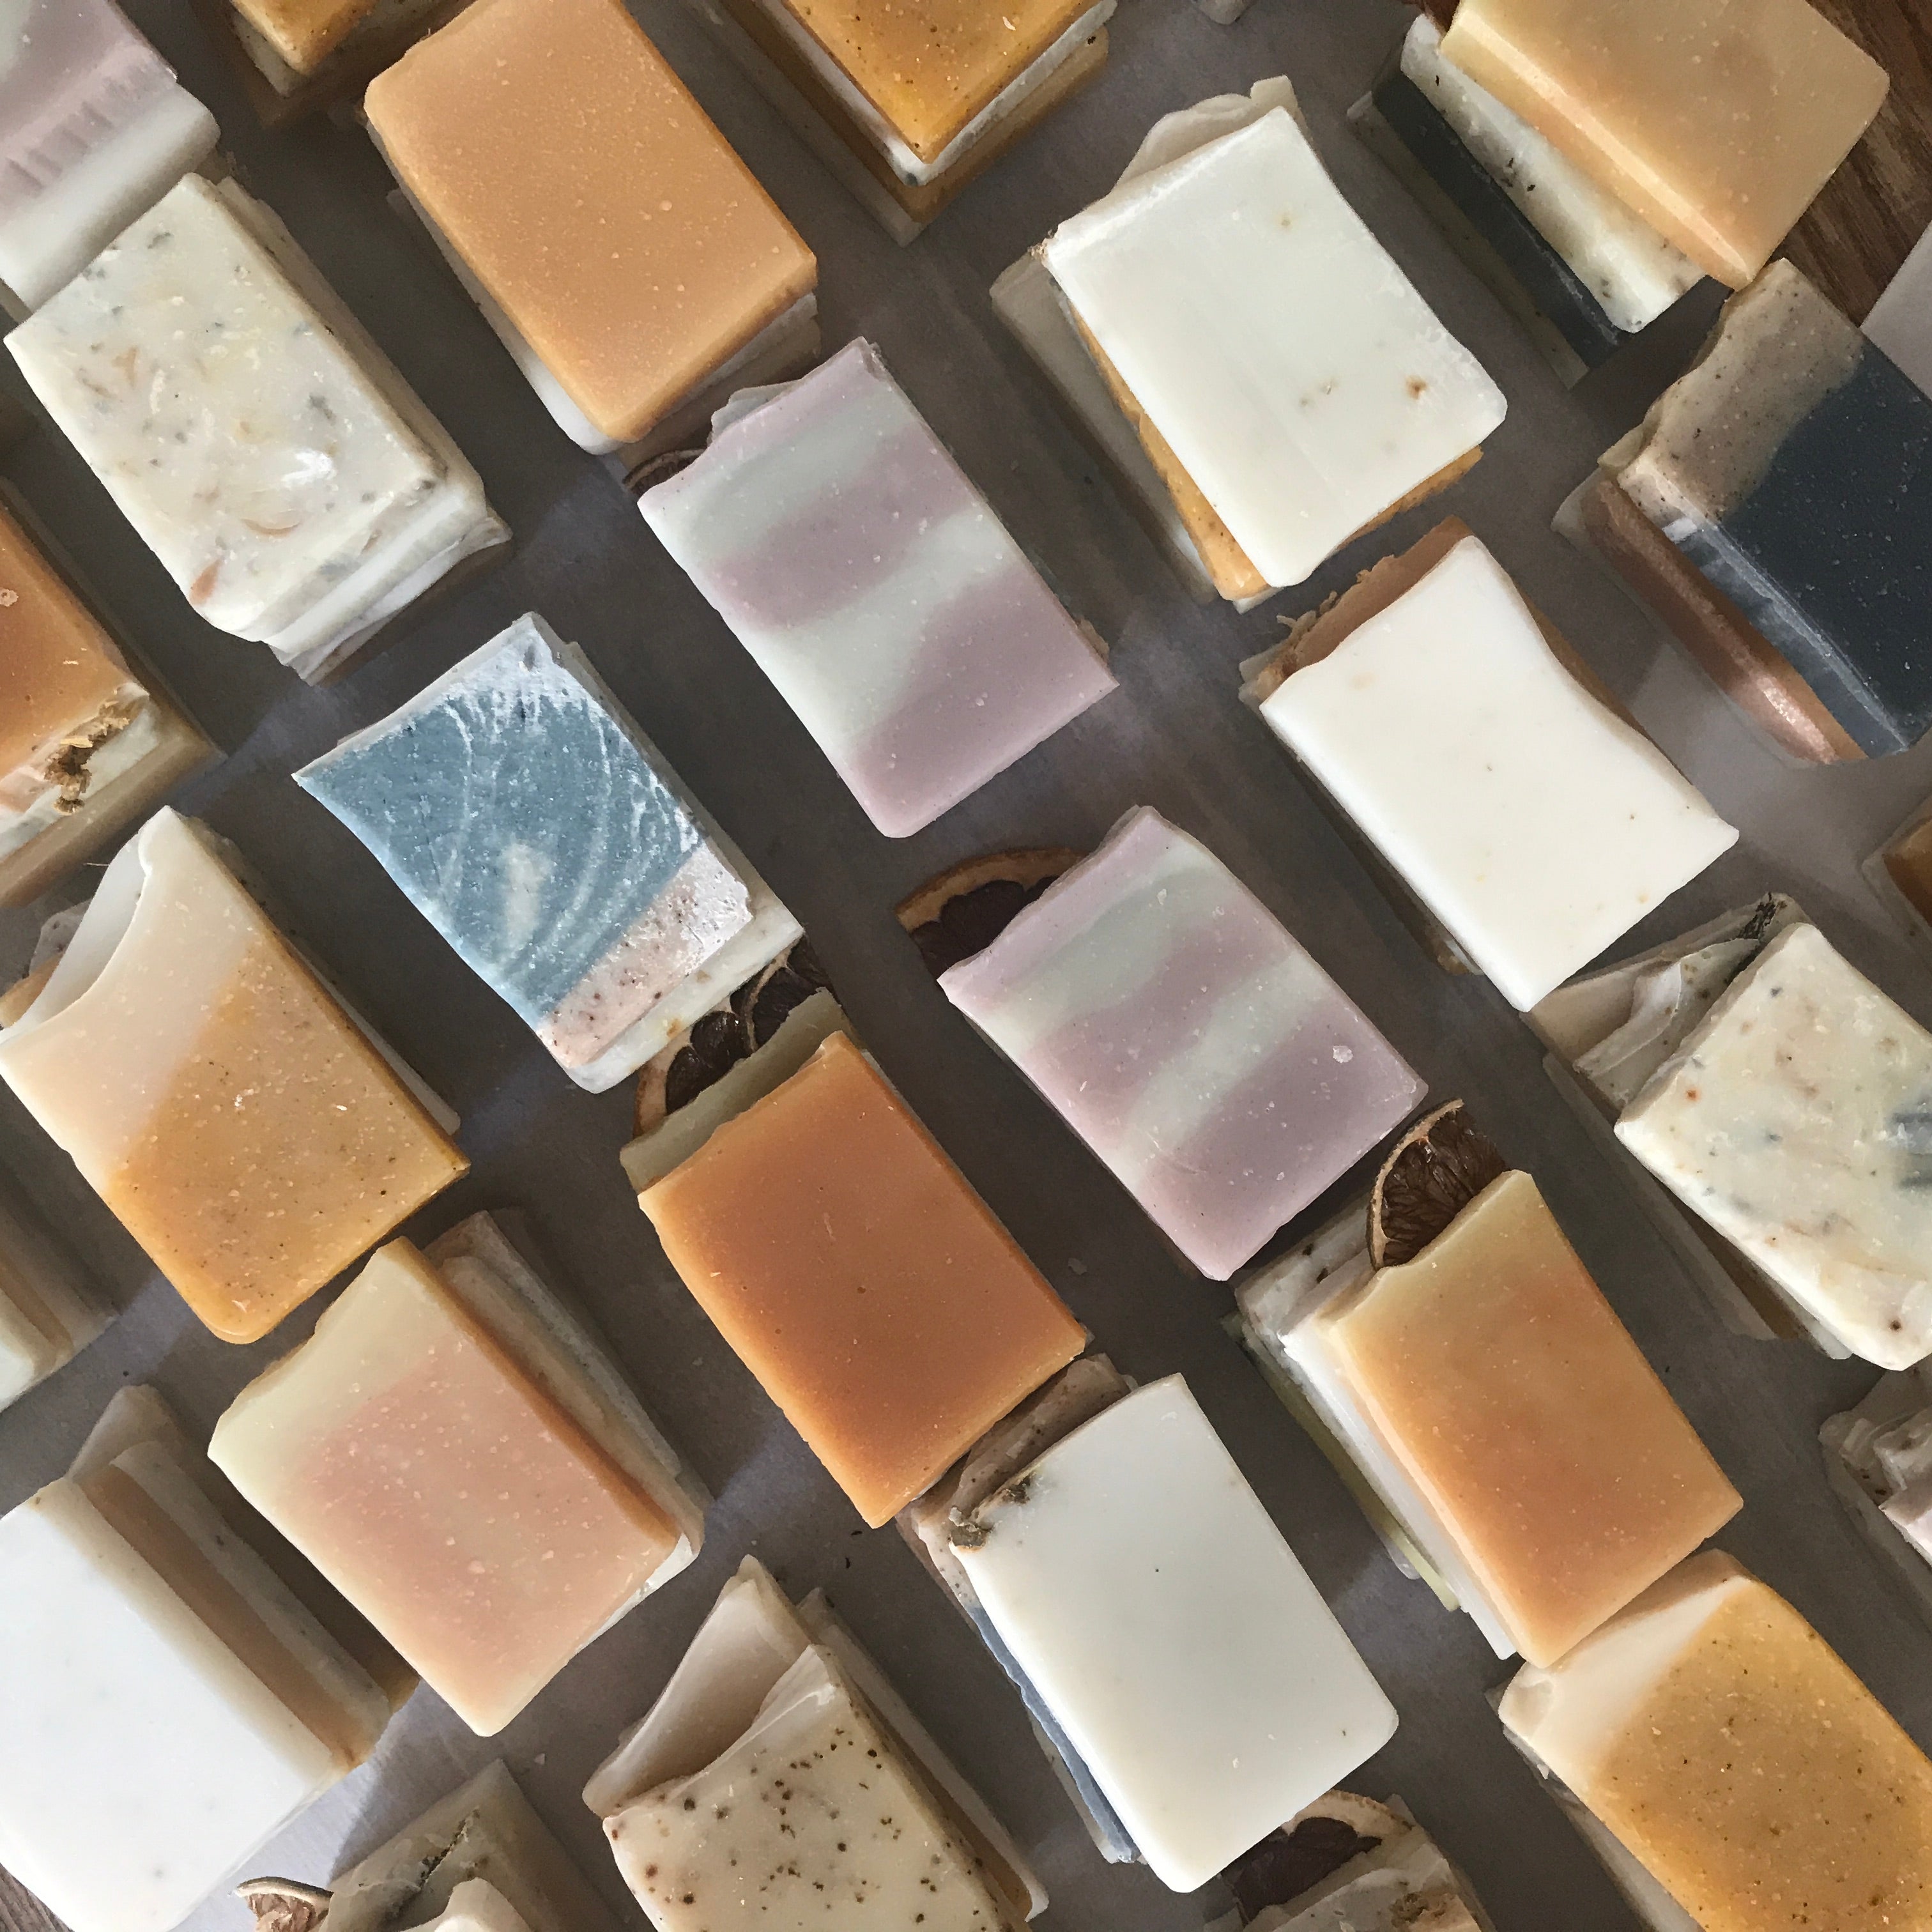 Hand Soap Sampler: A collection of four small, 100% natural artisanal hand soaps packaged in a reusable cotton bag. 